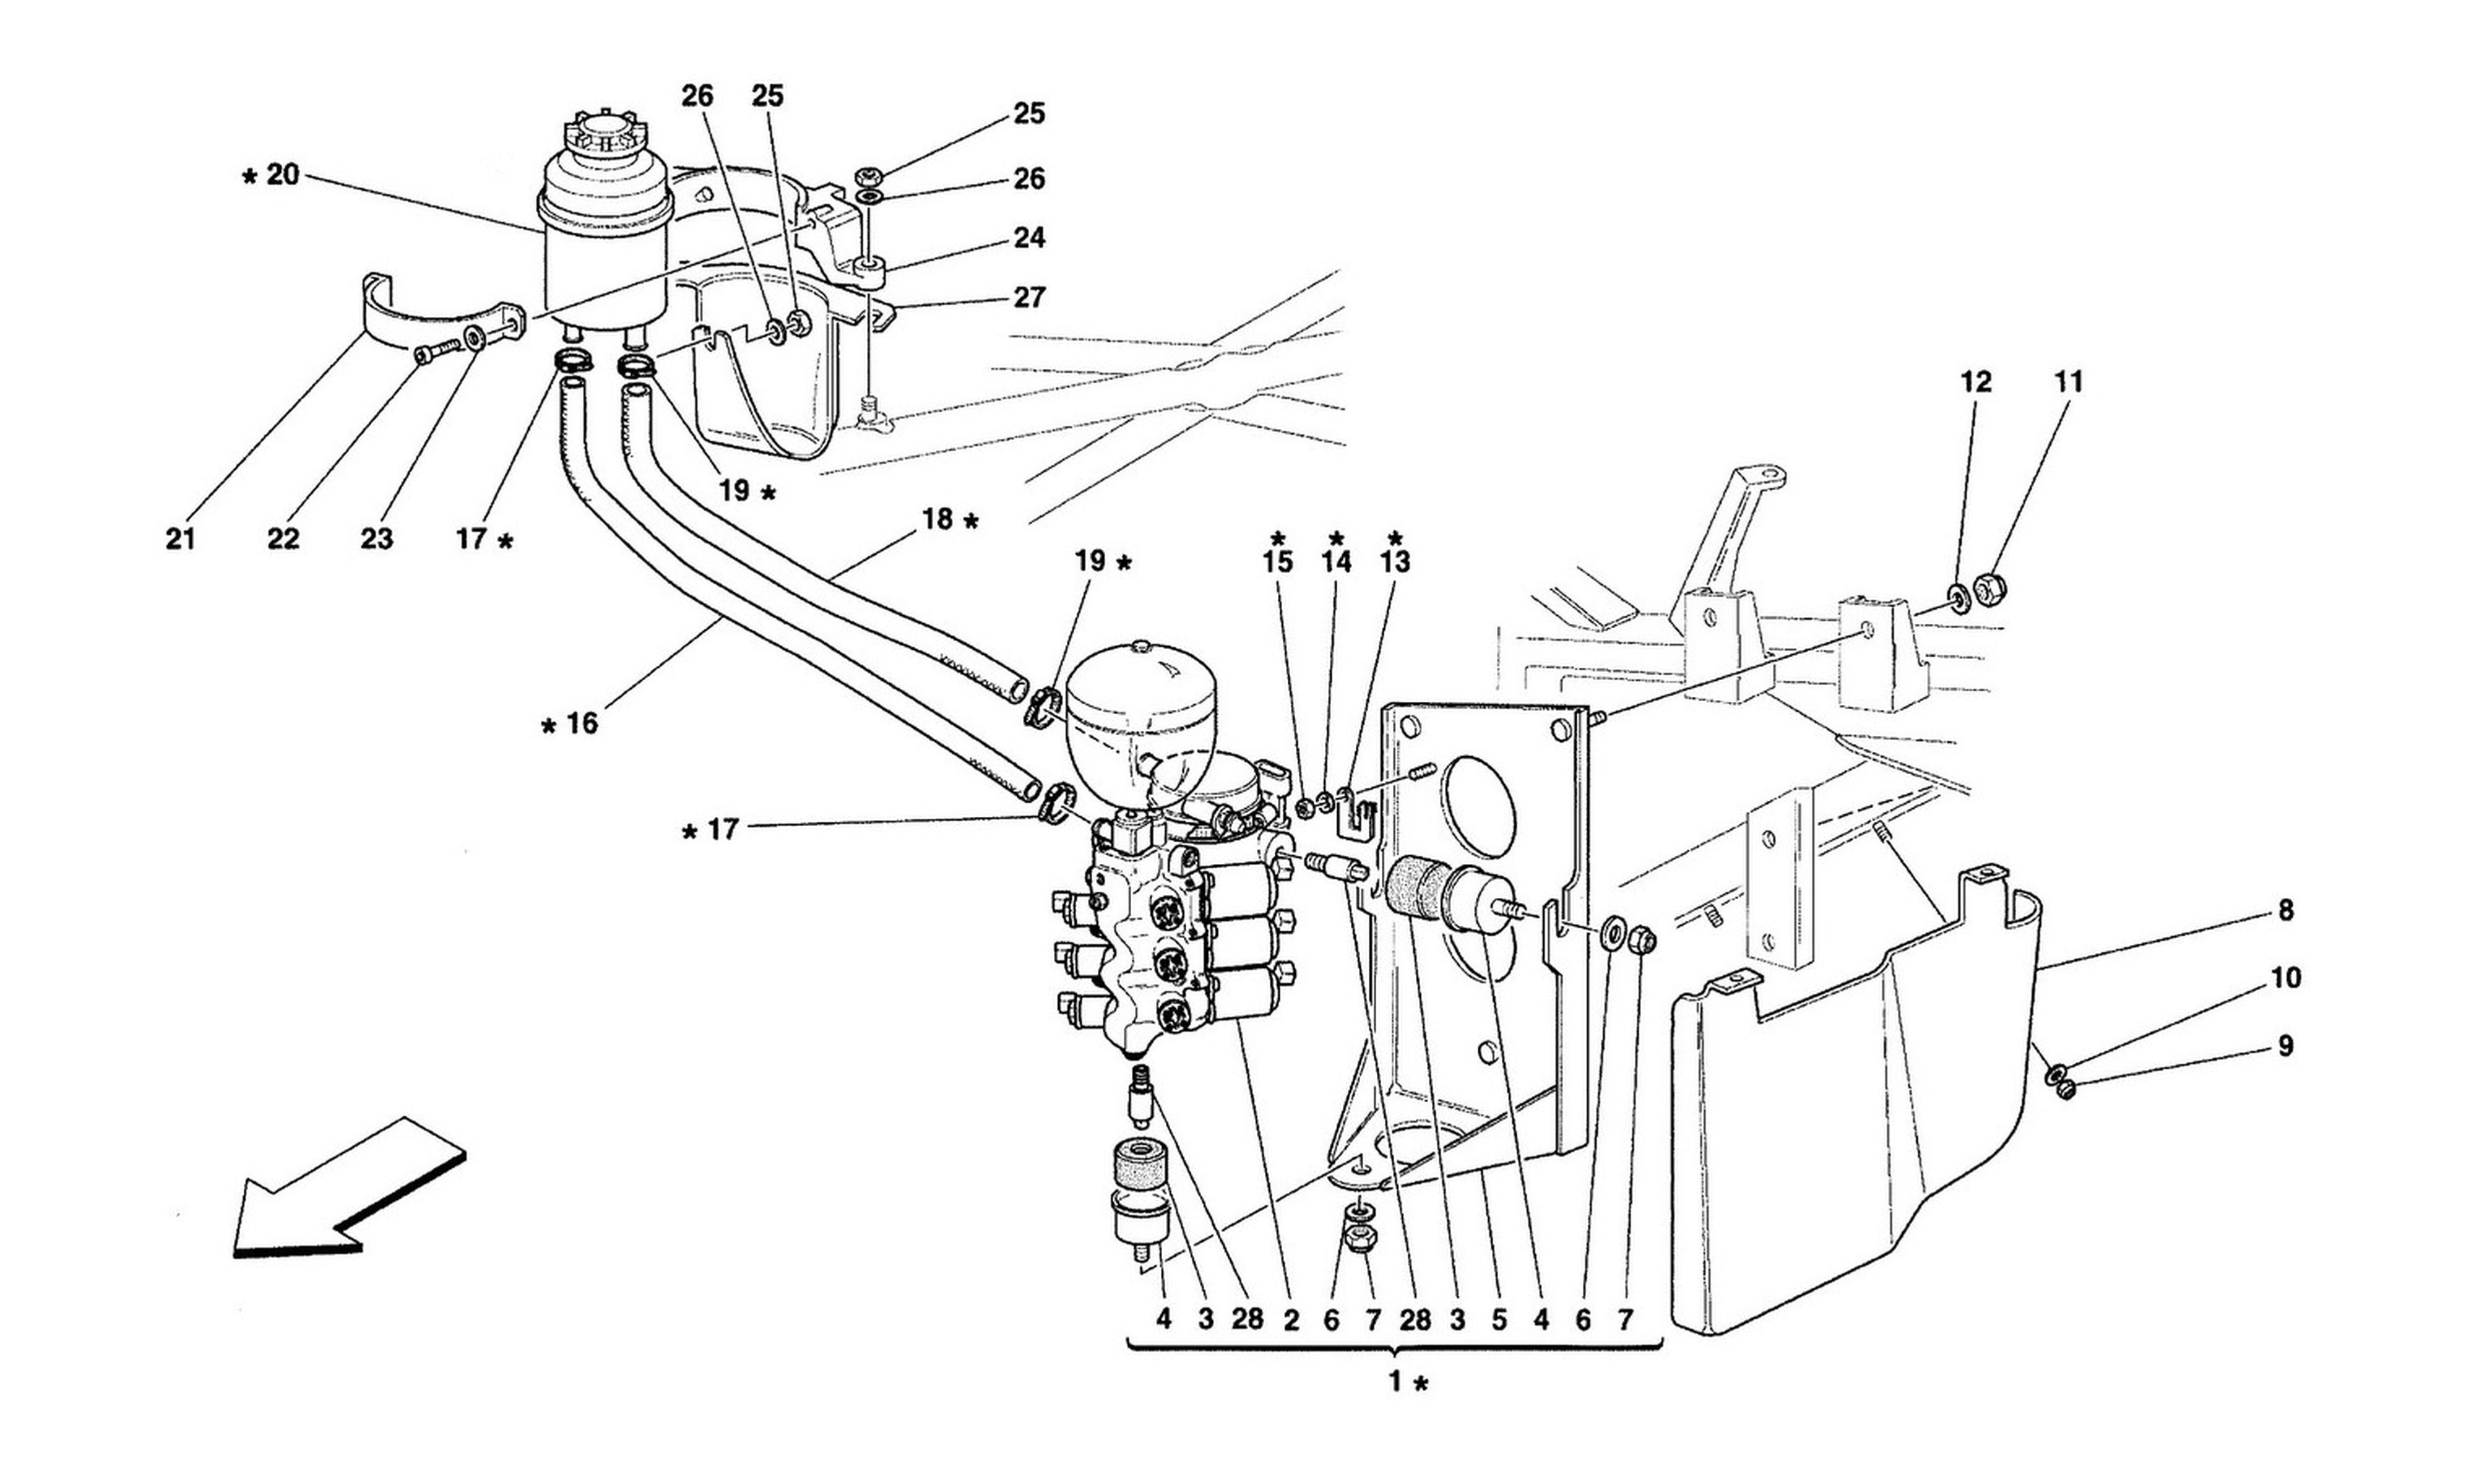 Schematic: Power Unit And Tank -Valid For 355 F1 Cars-